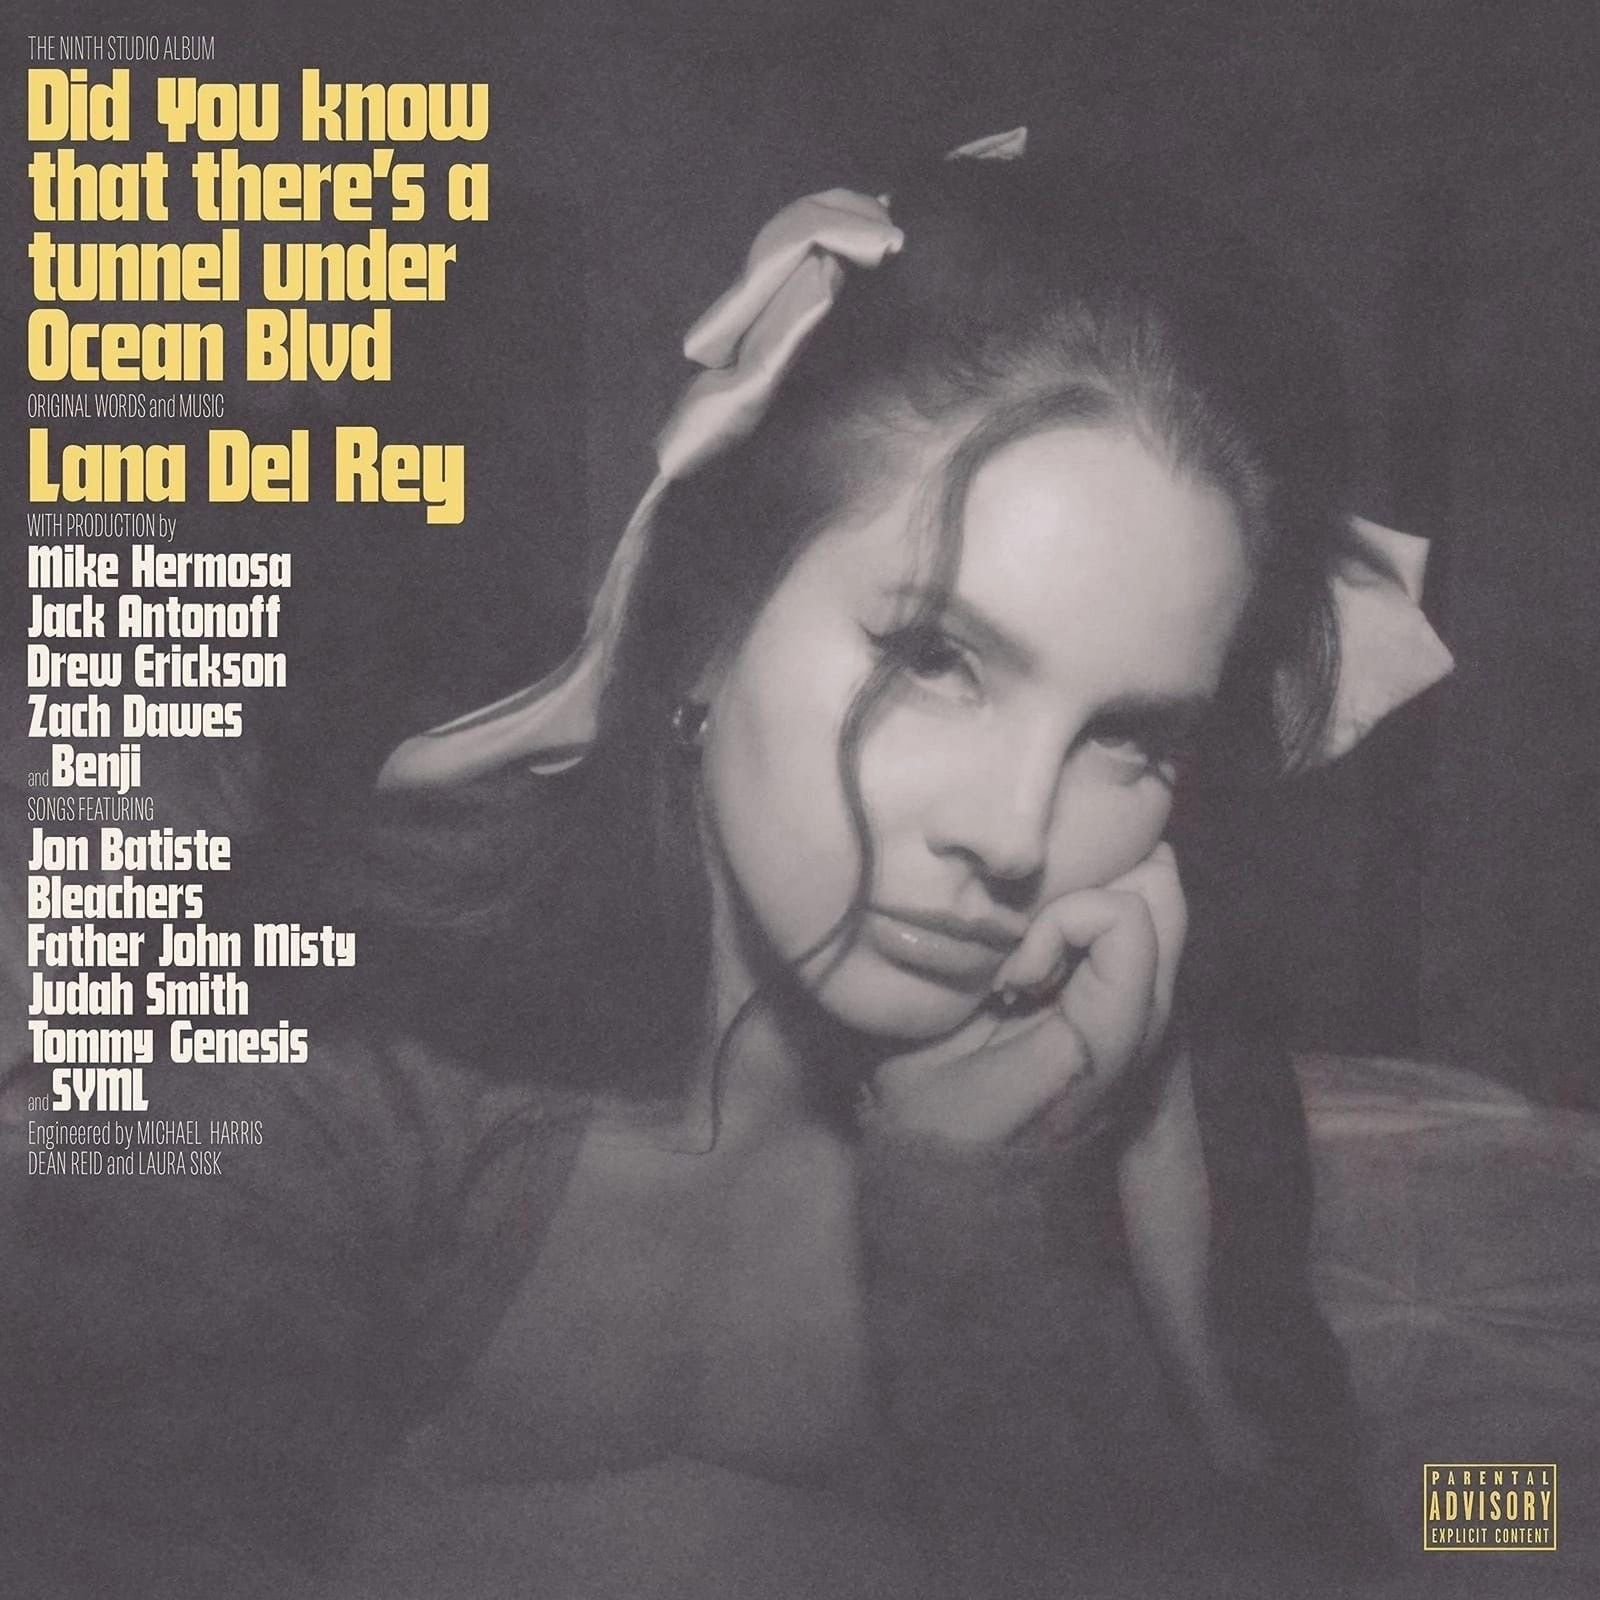 Lana Del Rey – Did You Know That There's a Tunnel Under Ocean Blvd (2 LP)